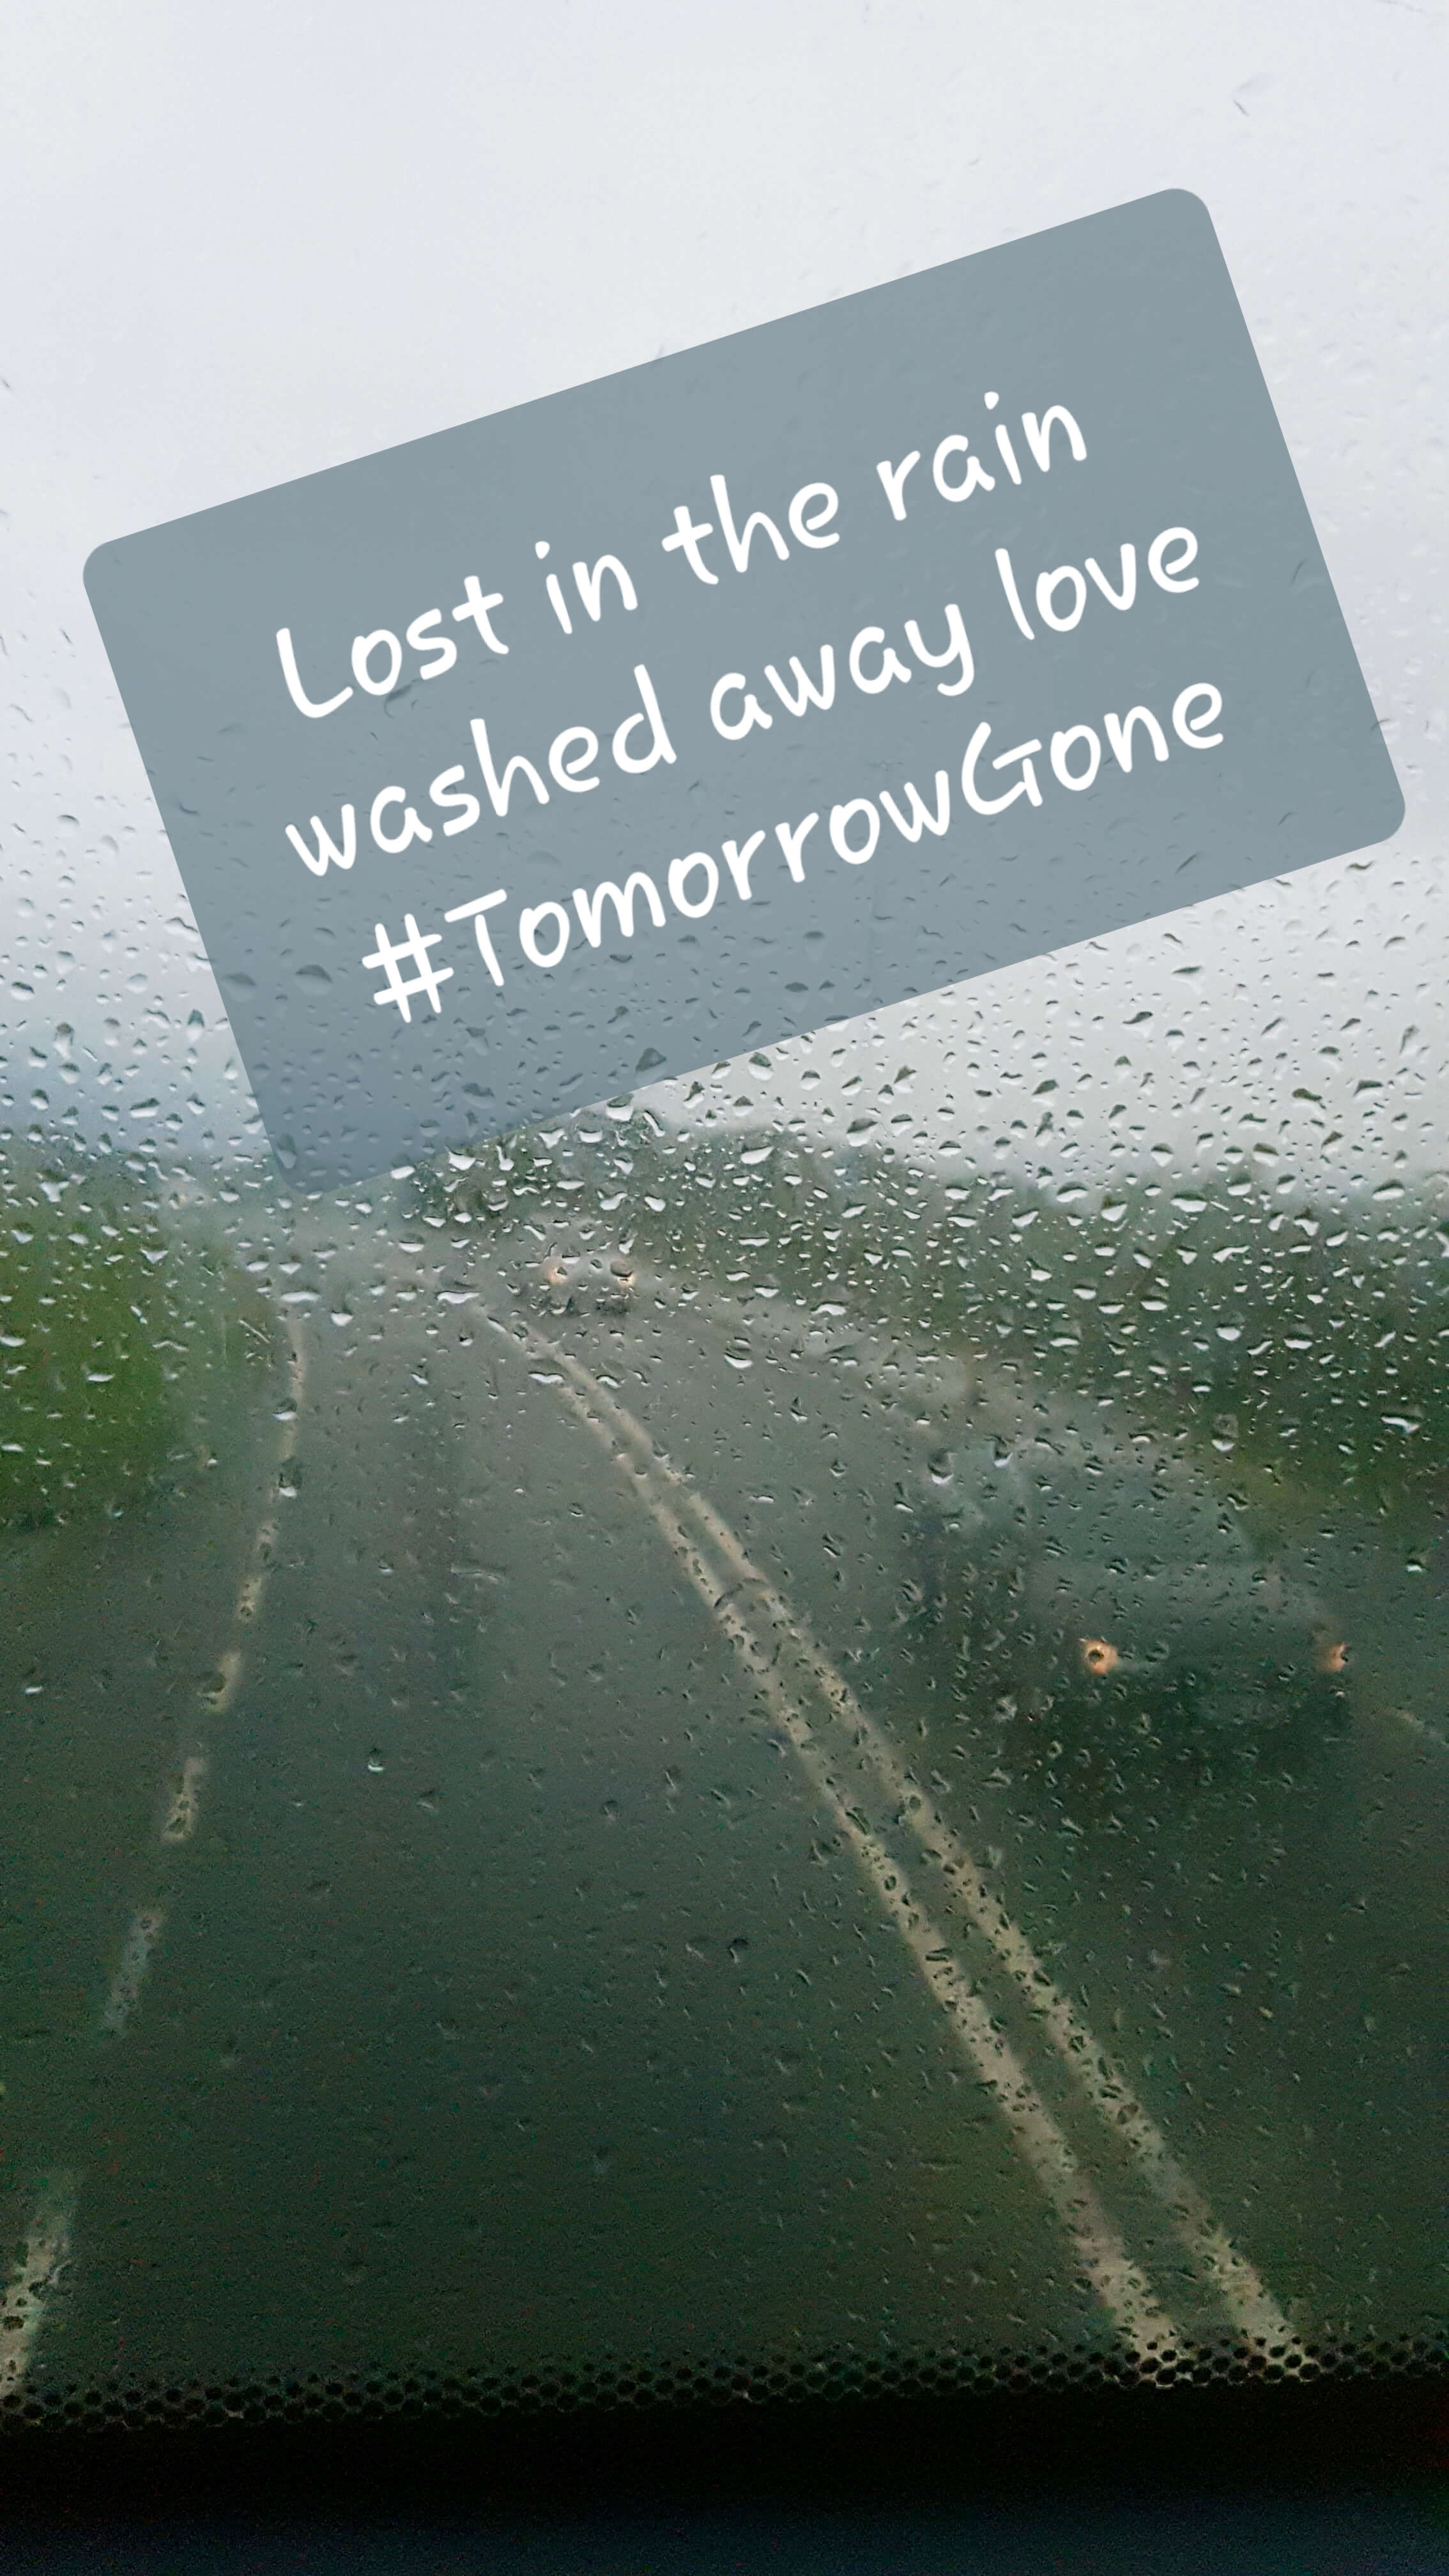 Lost in the rain
washed away love
#tomorrowGone